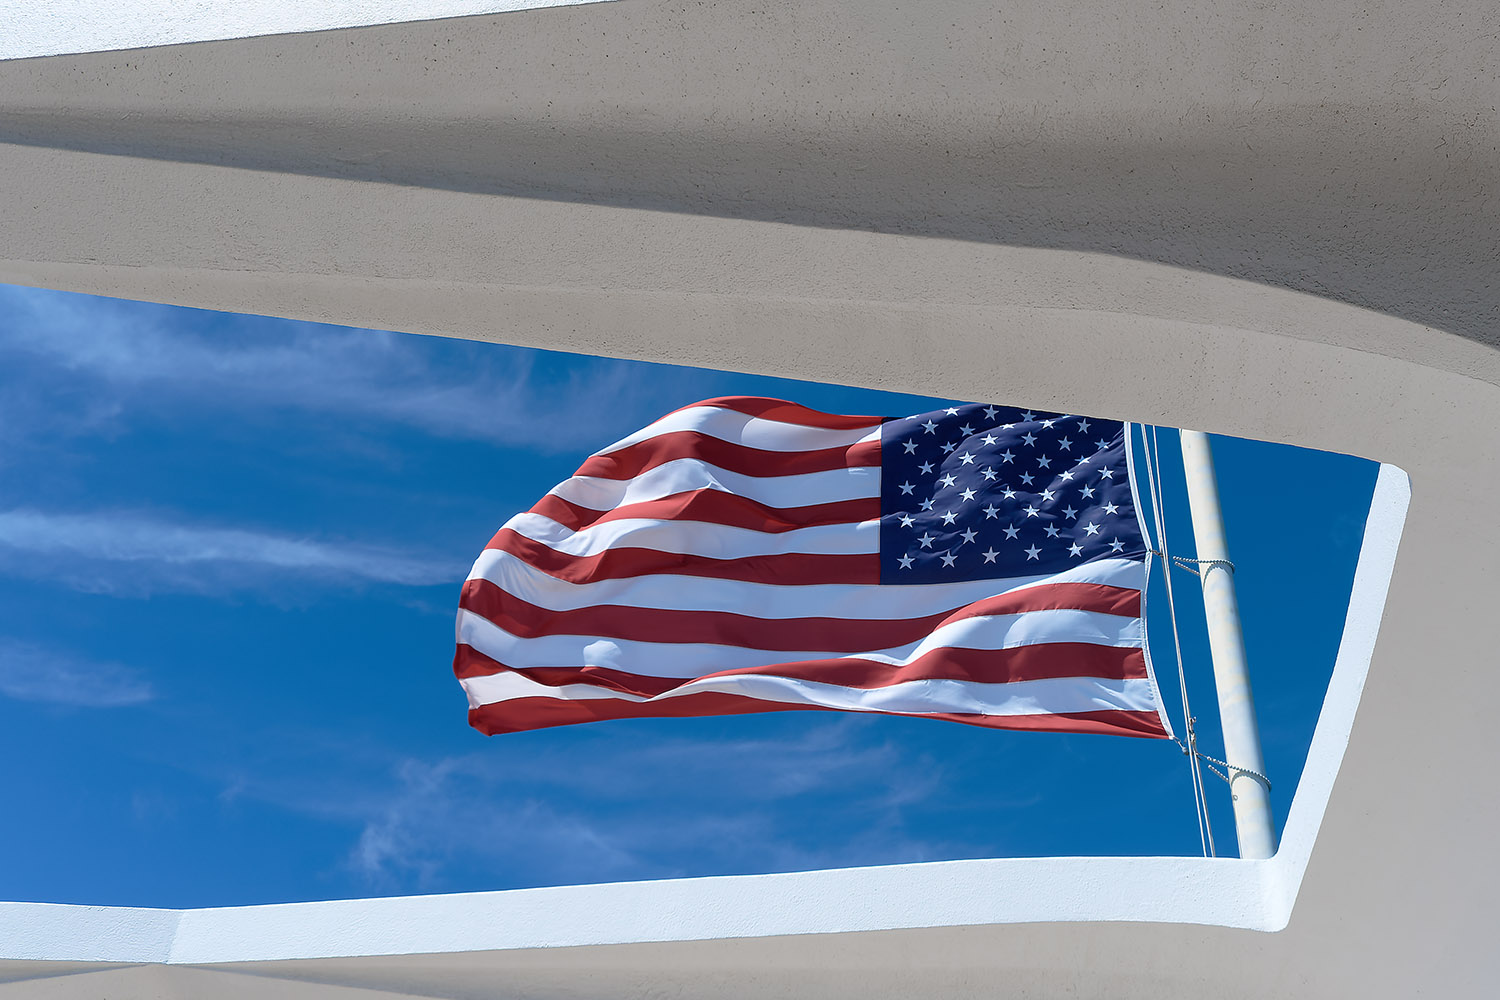 The Star-Spangled Banner seen through the roof of the U.S.S. Arizona Memorial